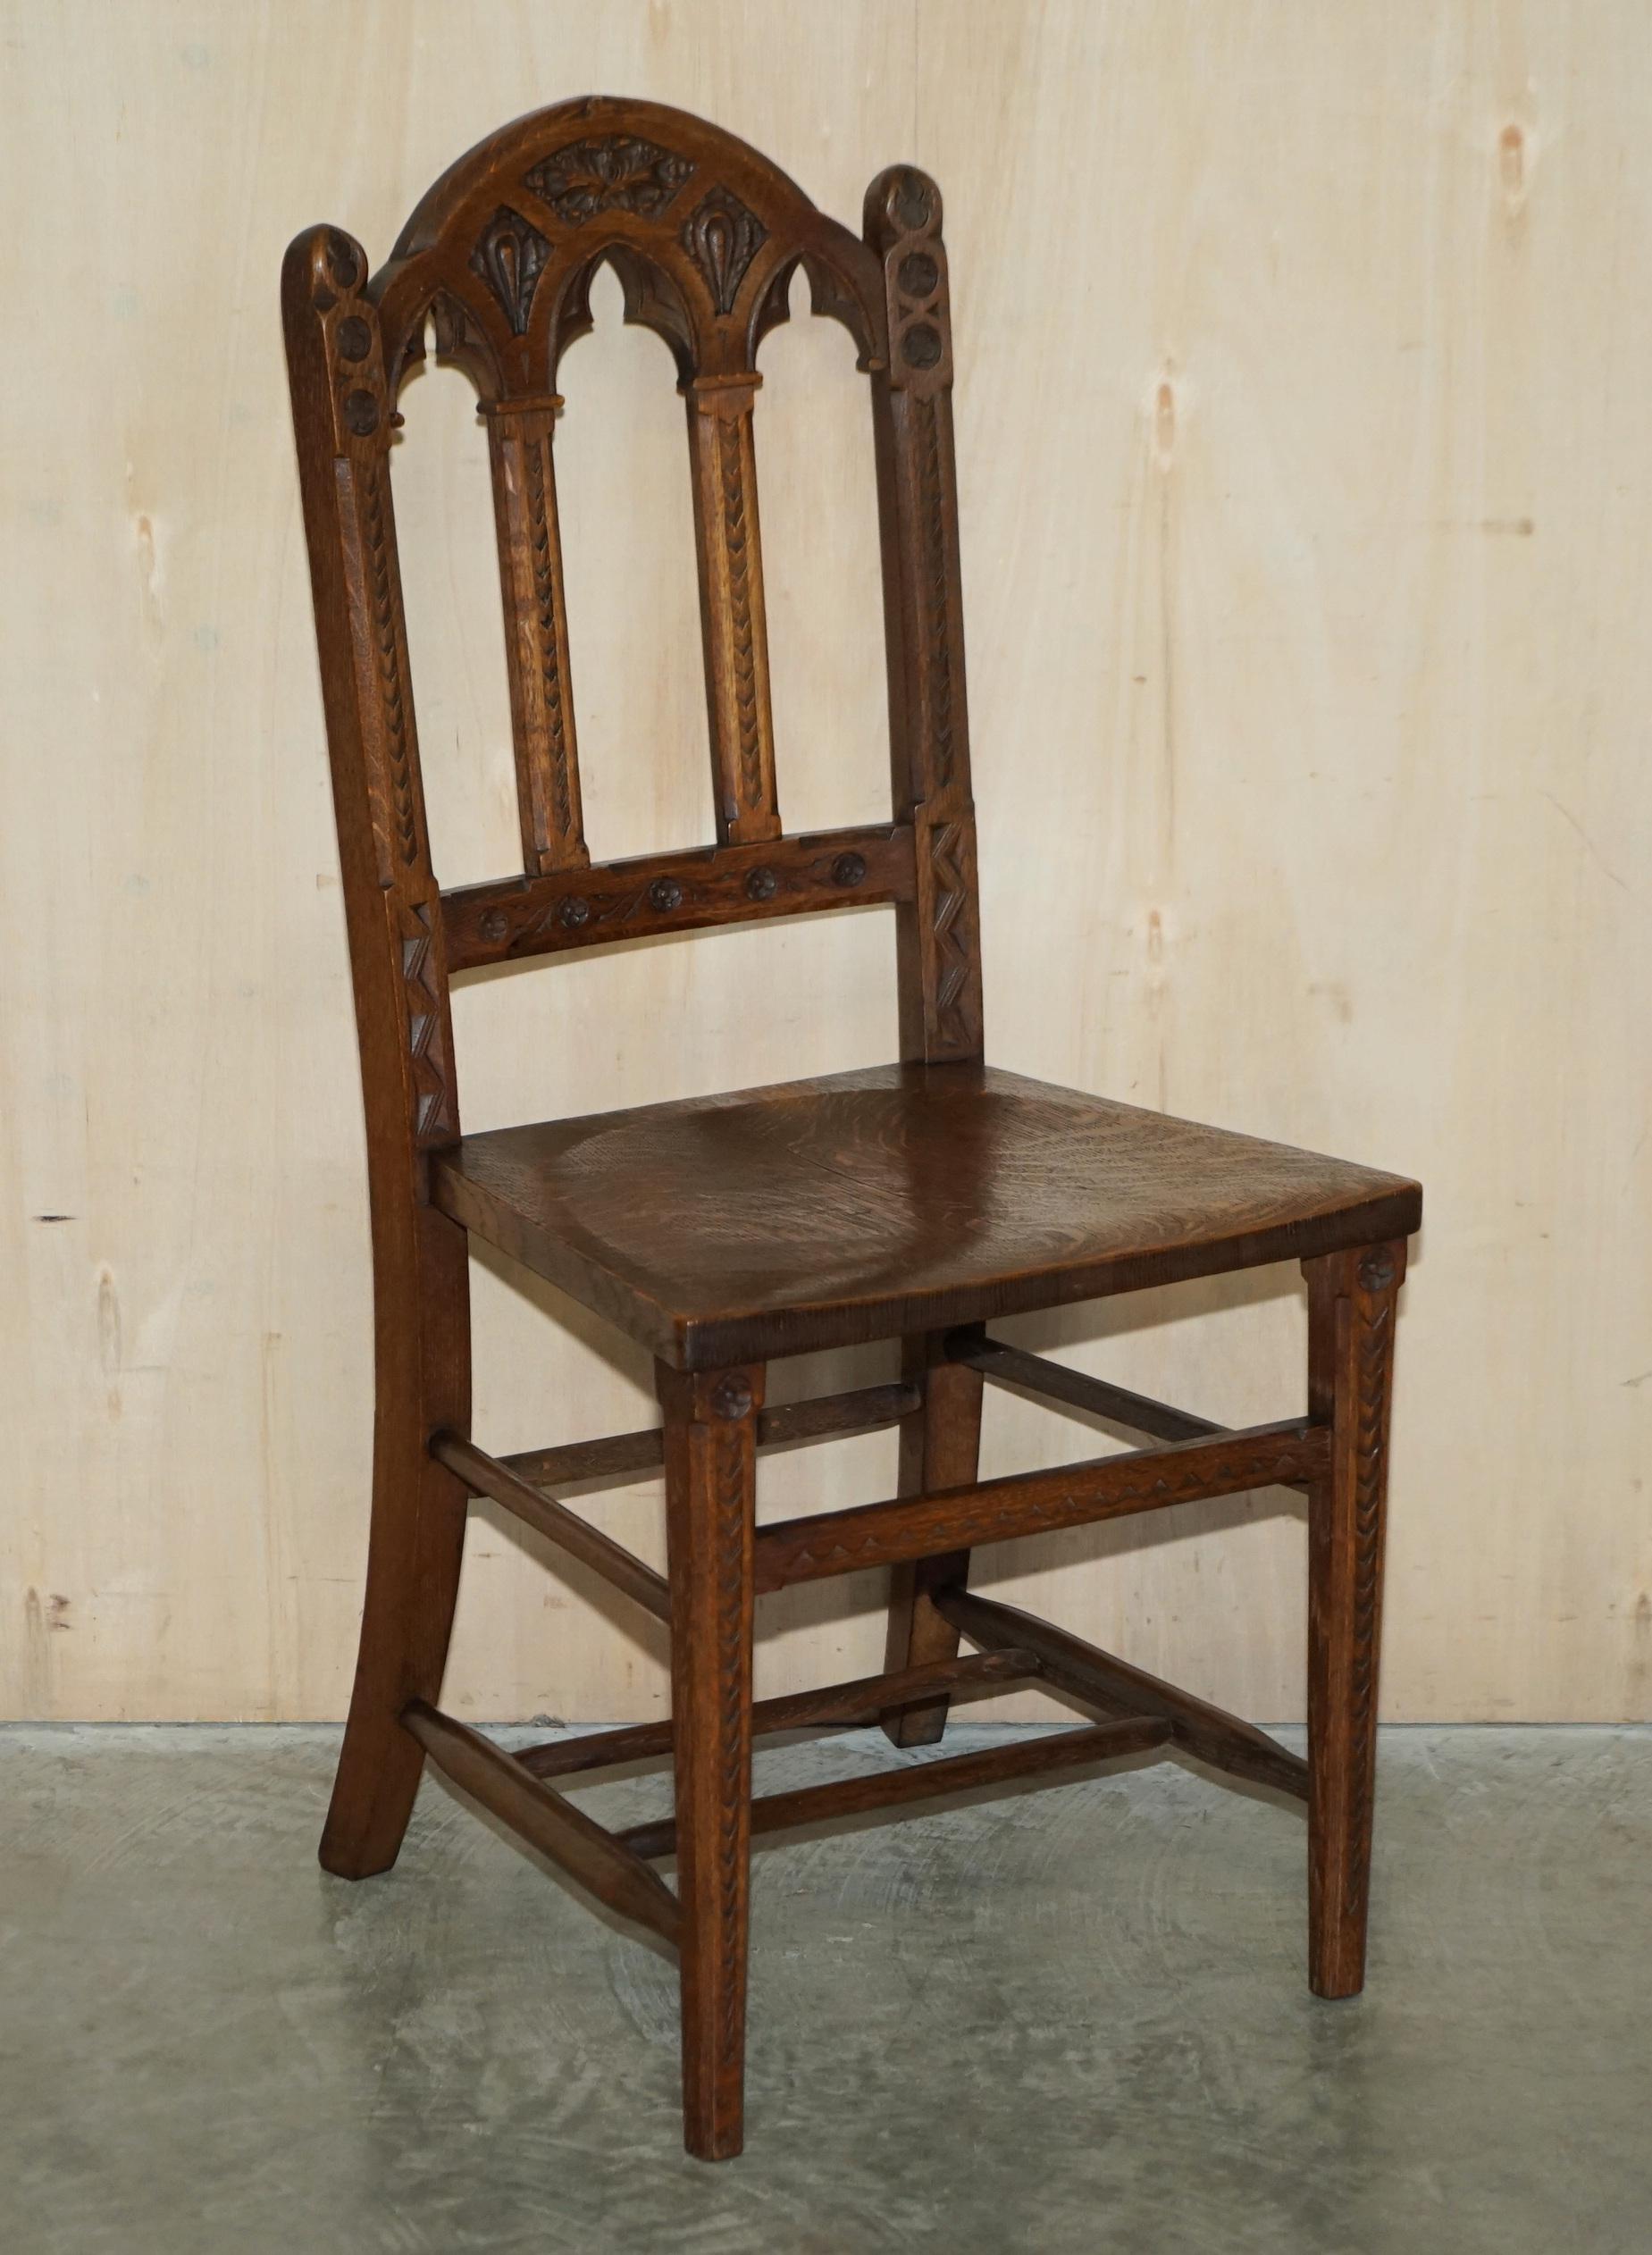 Gothic Revival SIX ANTIQUE ORNATELY CARVED STEEPLE BACK WALNUT GOTHIC REVIVAL DiNING CHAIRS For Sale